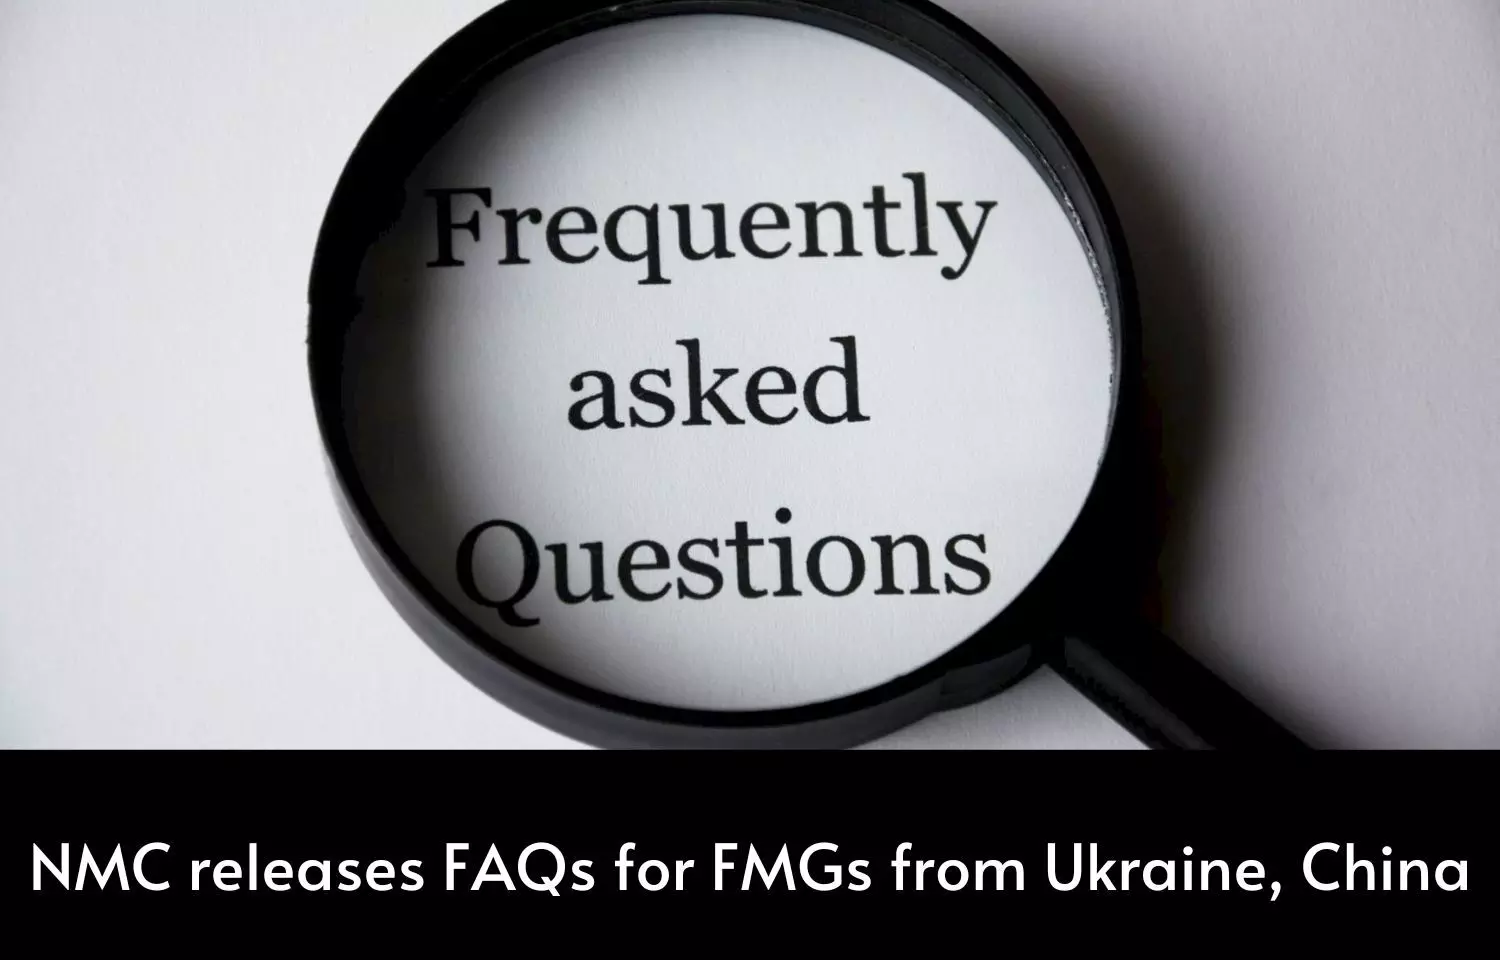 NMC releases FAQs based on queries raised by FMGs from Ukraine, China